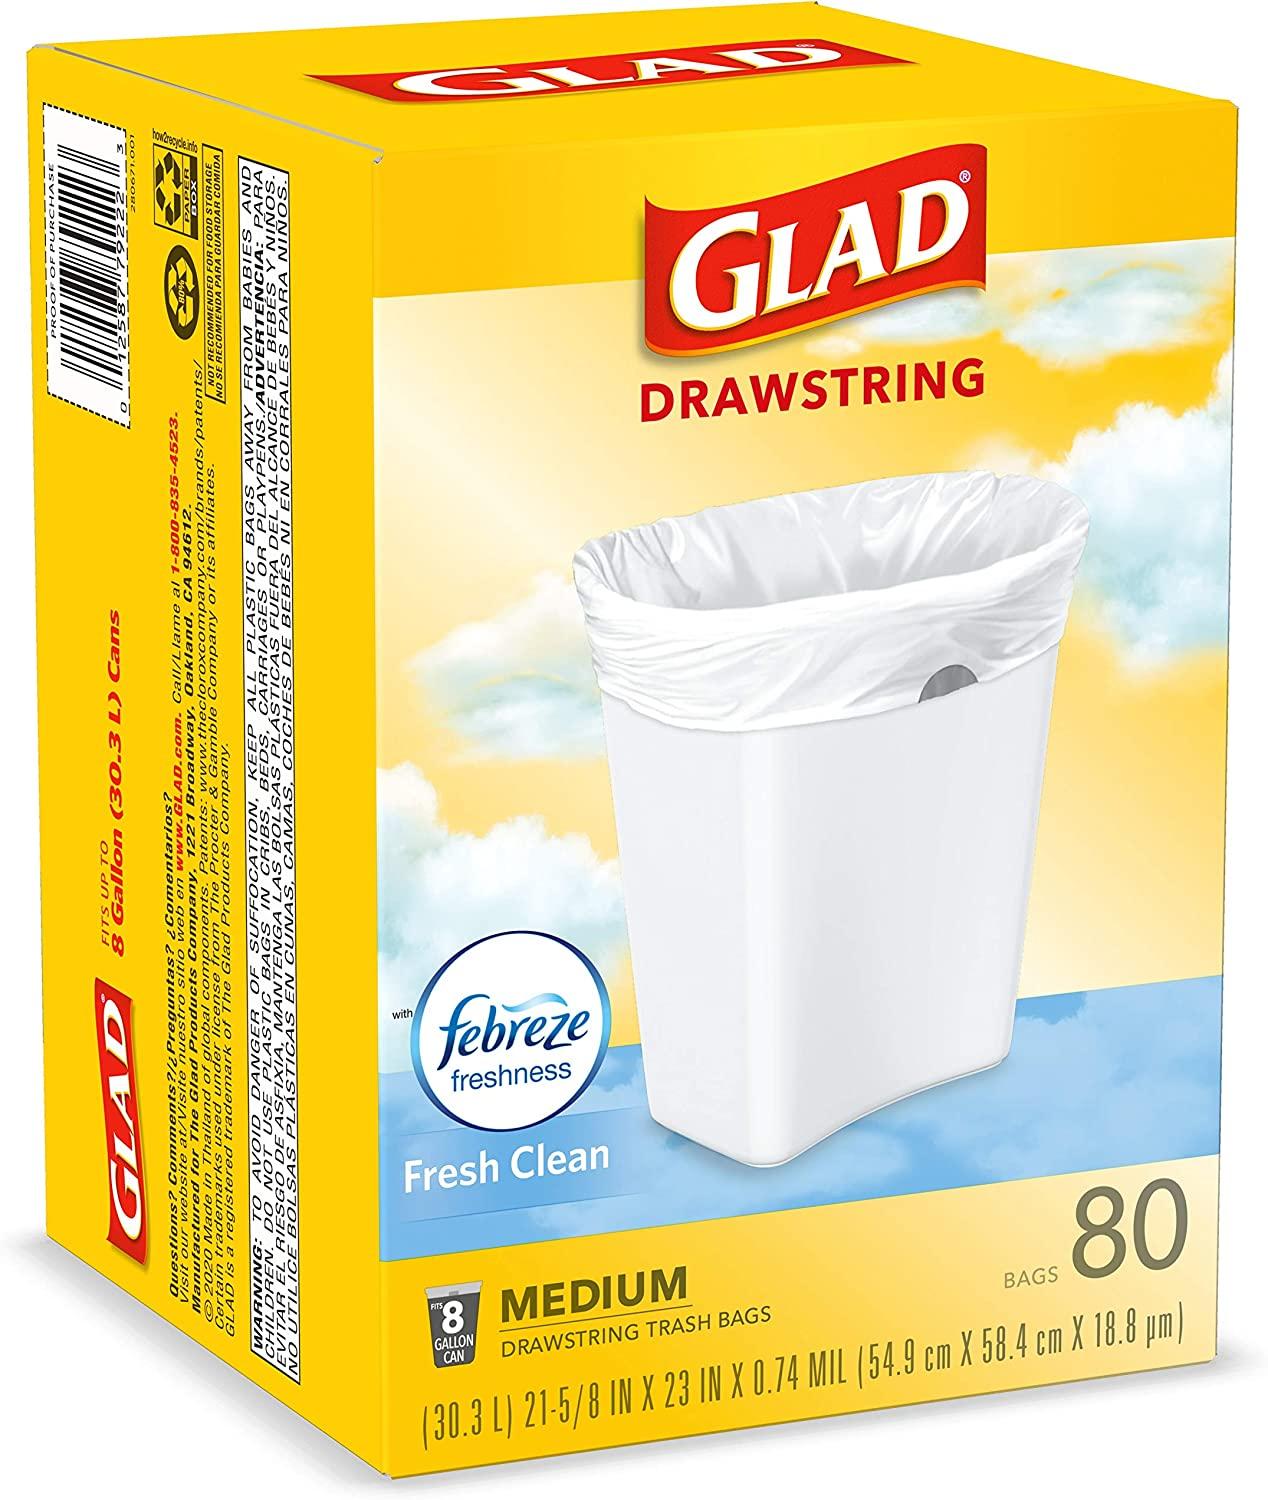 Glad Trash Bags Large 20ct : Cleaning fast delivery by App or Online